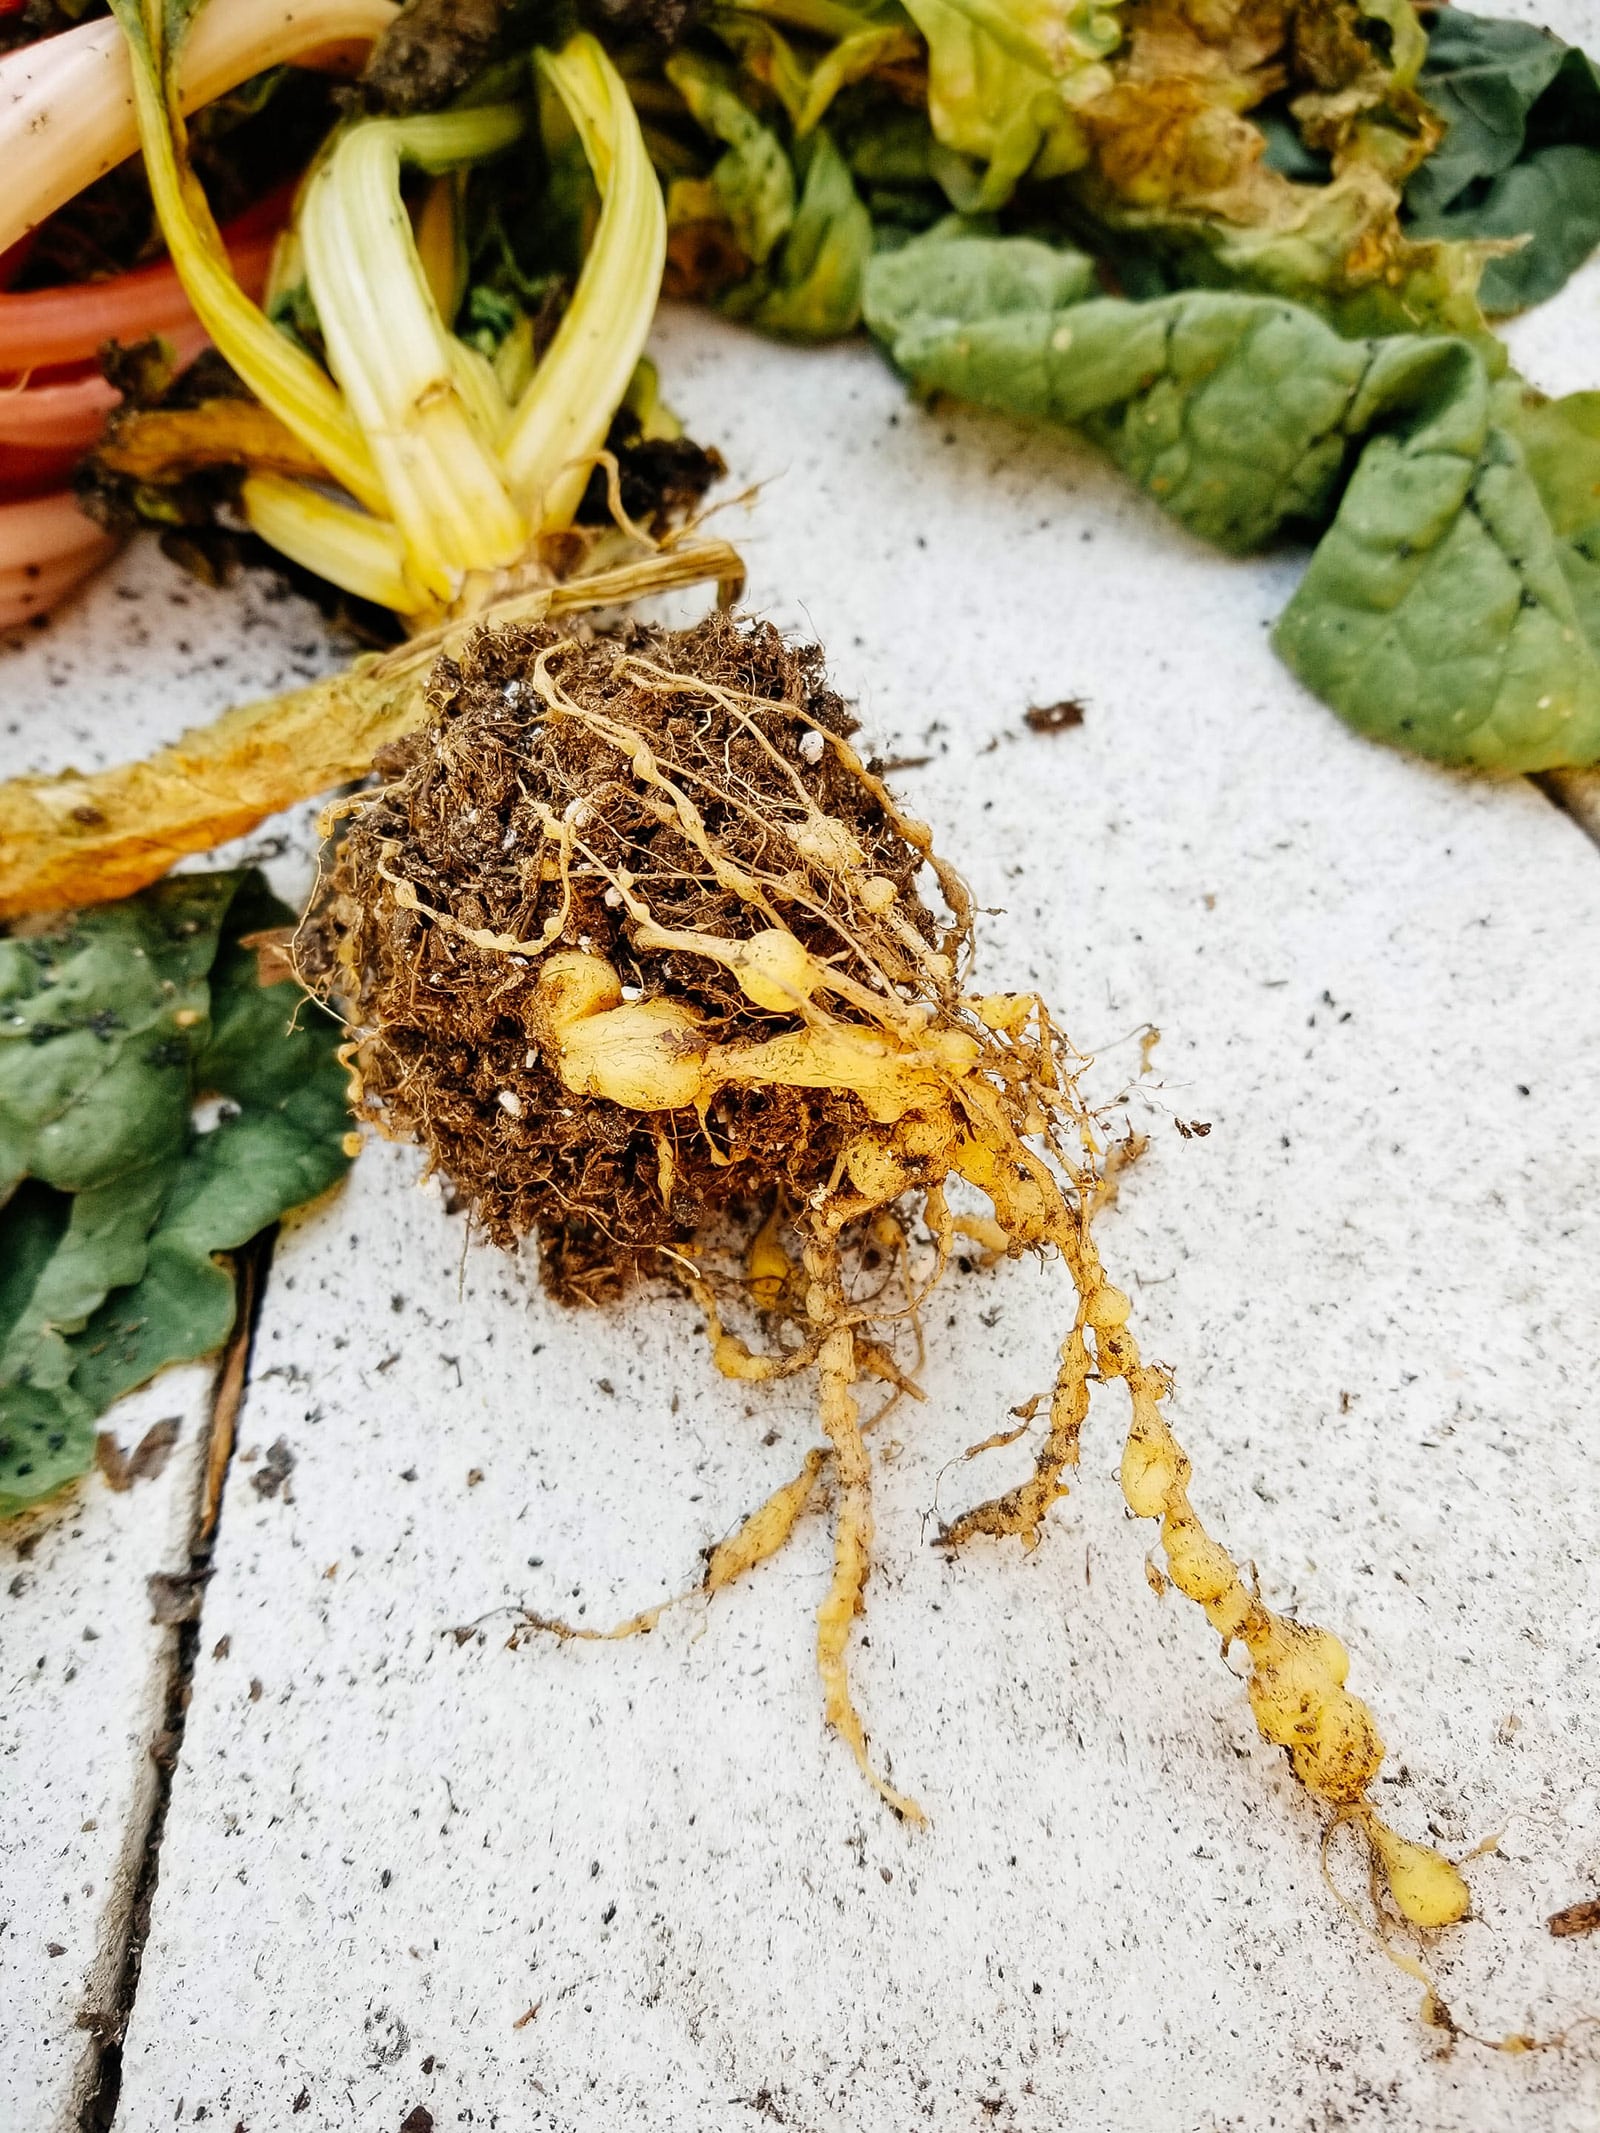 How to control root-knot nematodes organically in a vegetable garden